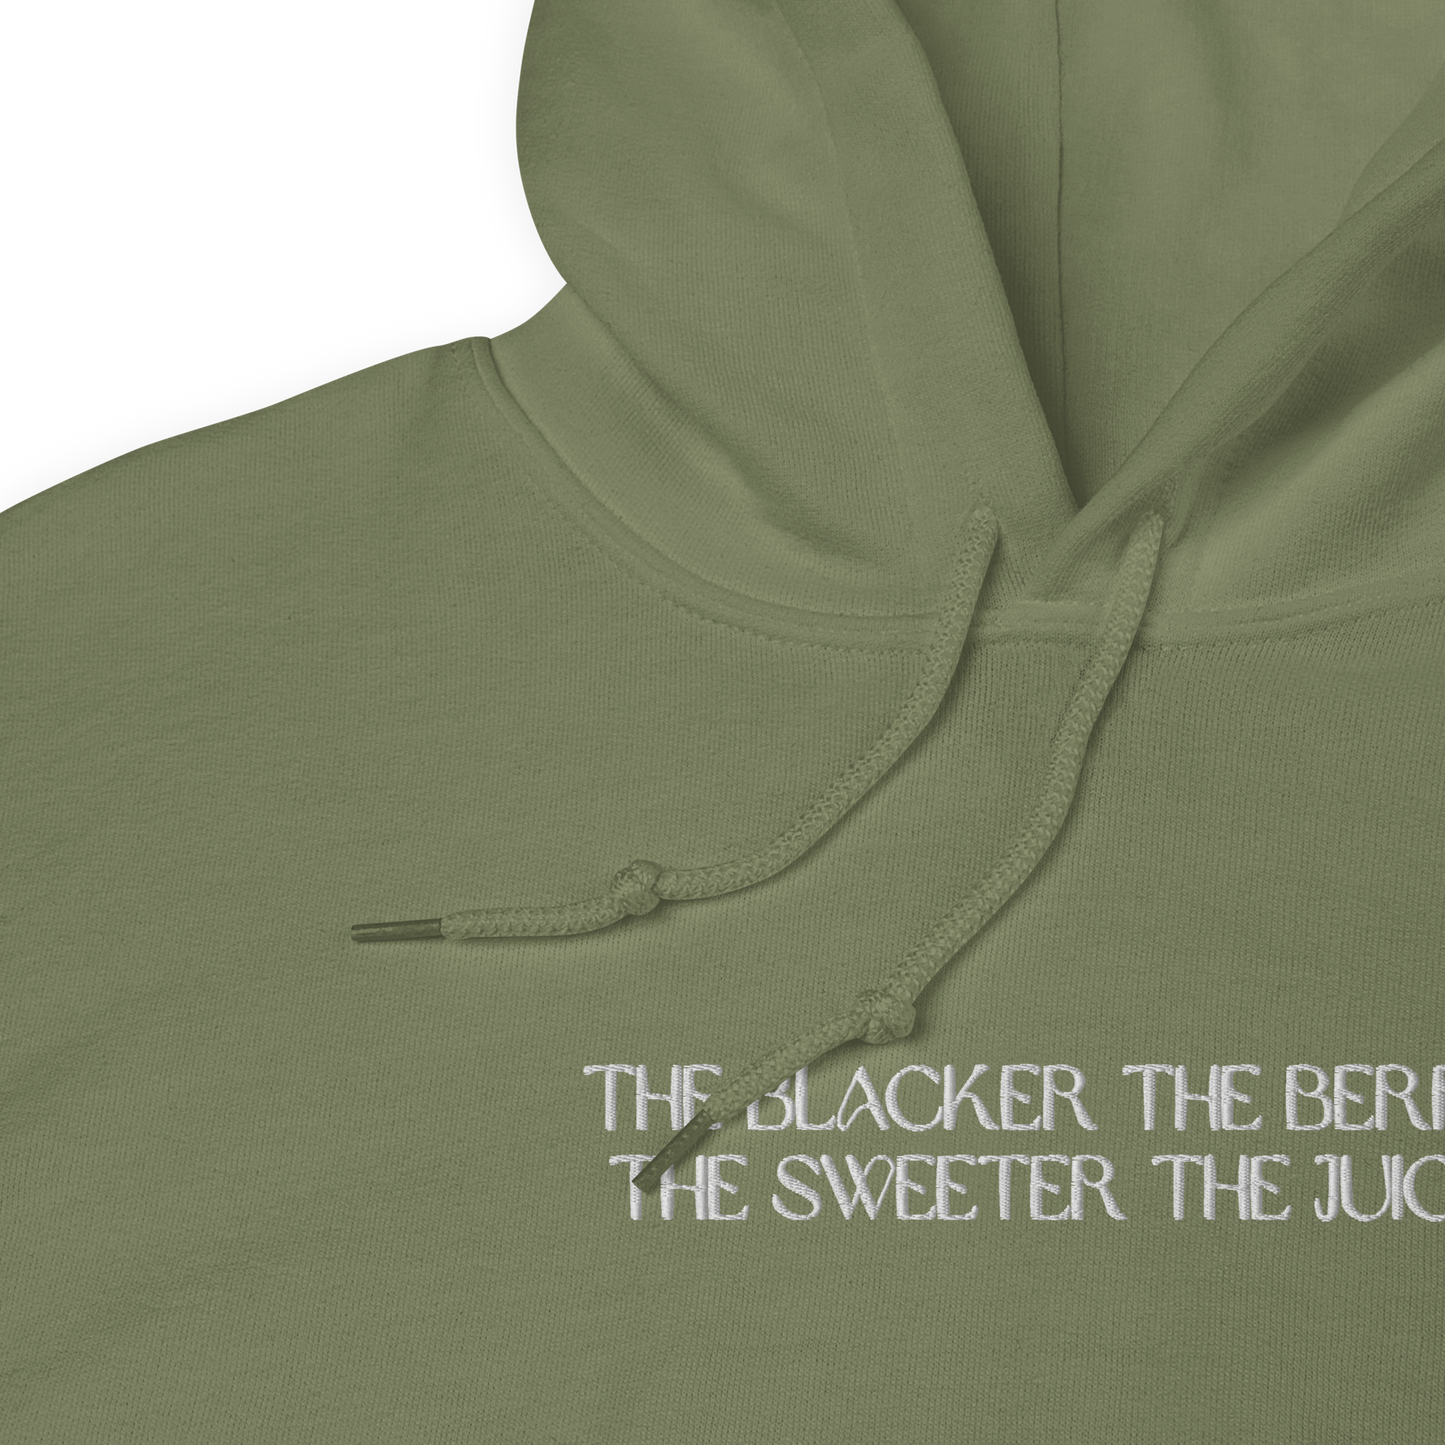 The Blacker the Berry... Embroidered Hoodie